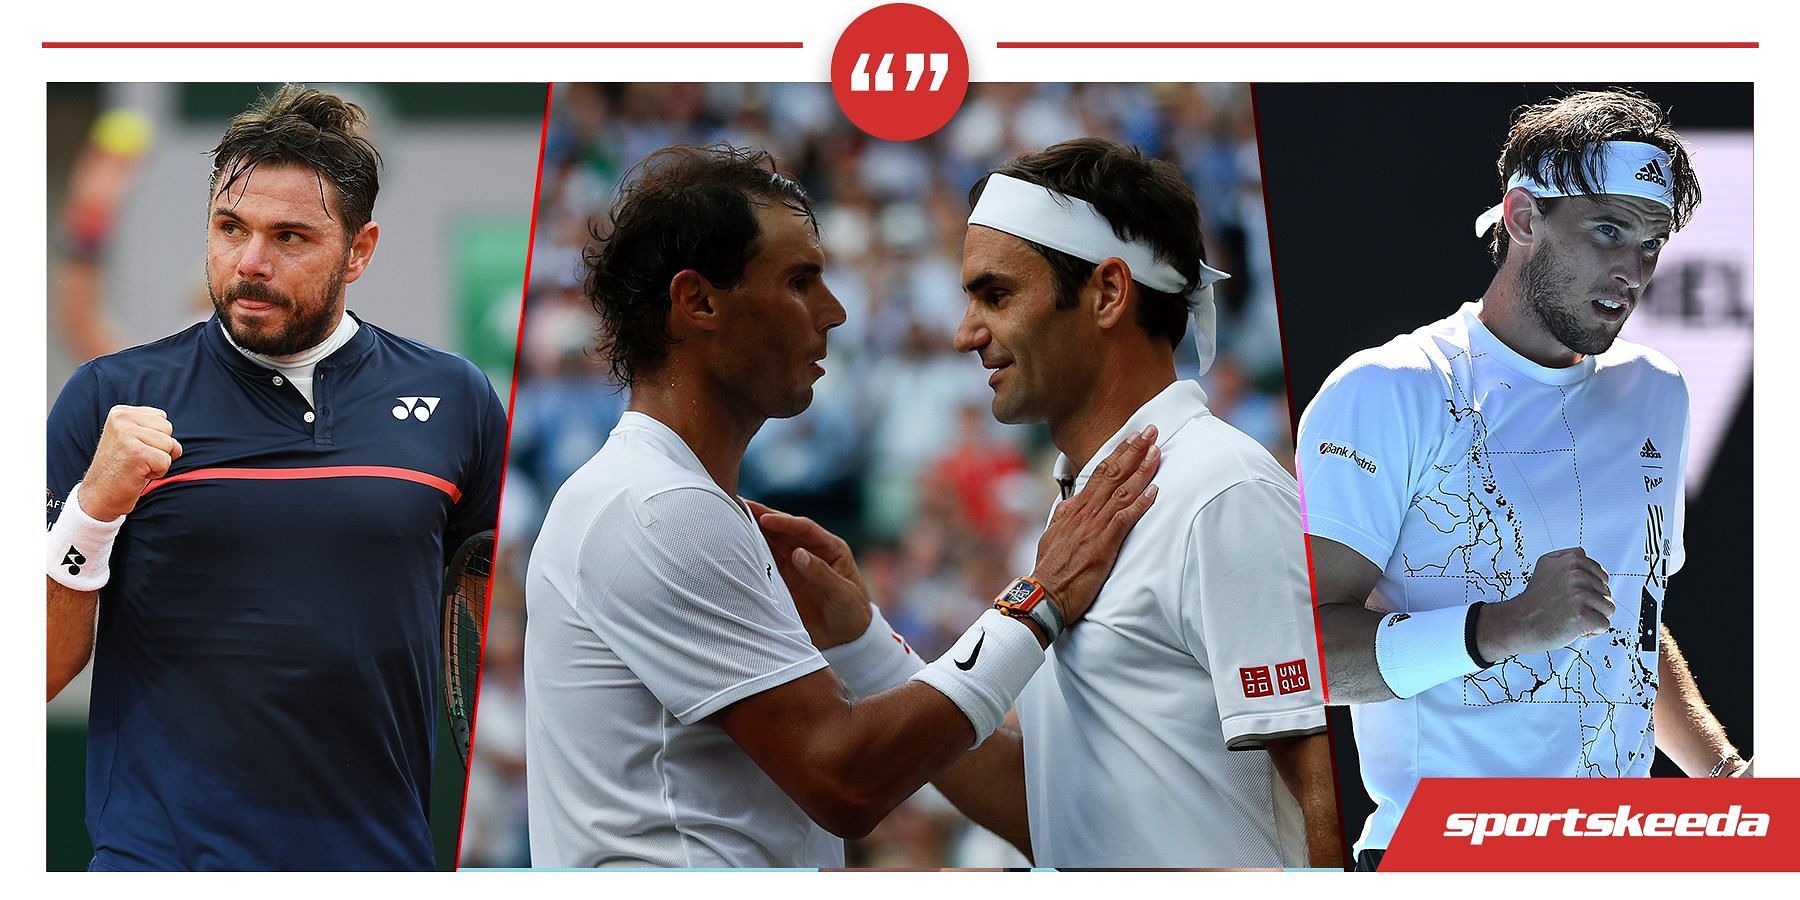 ATP players choose their favorite rivalry